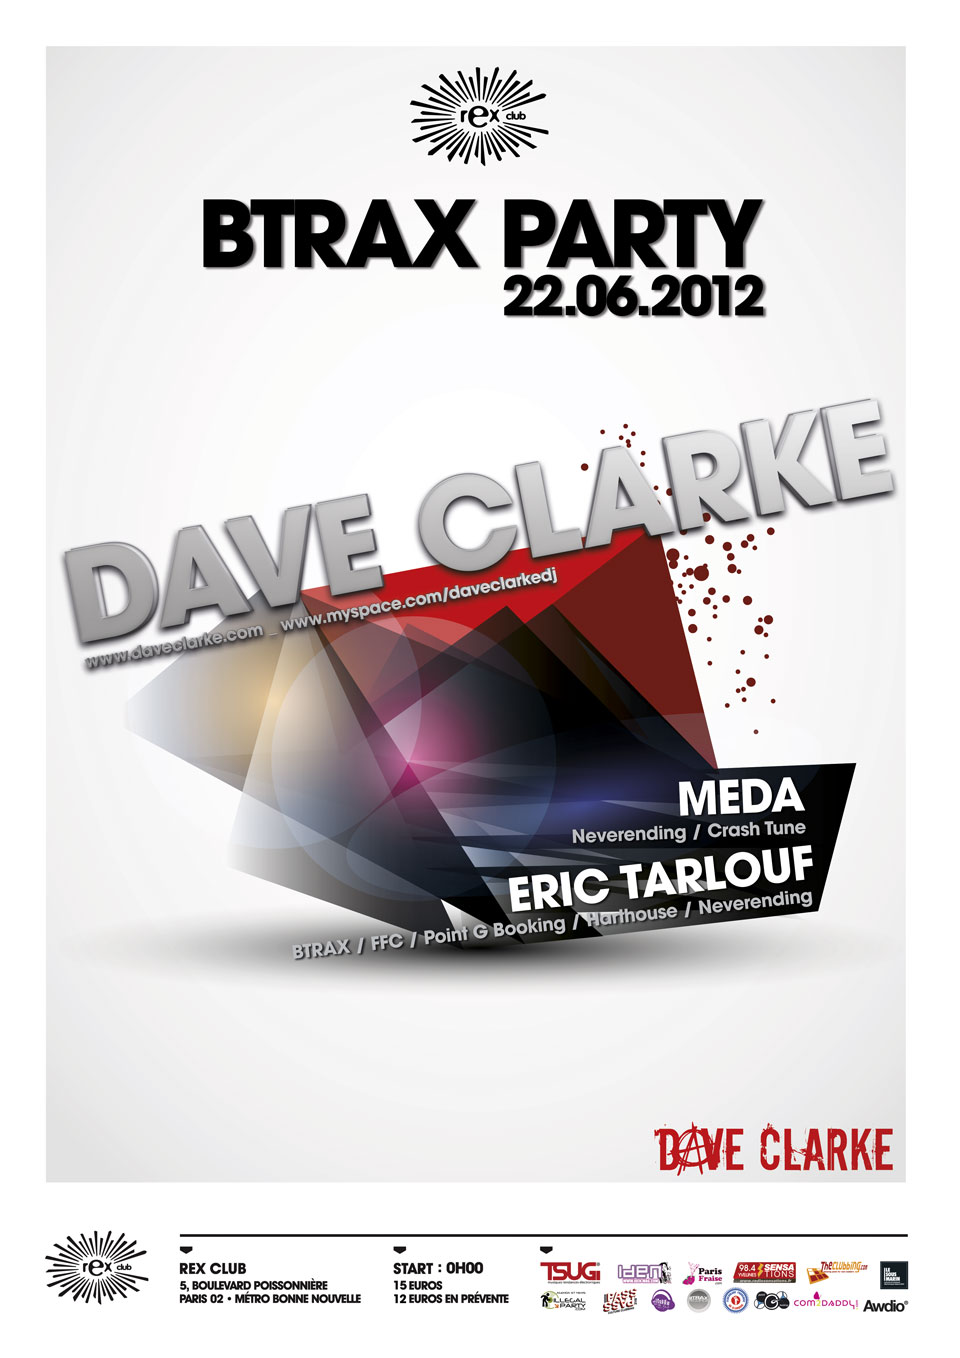 BTRAX party 22.06.12